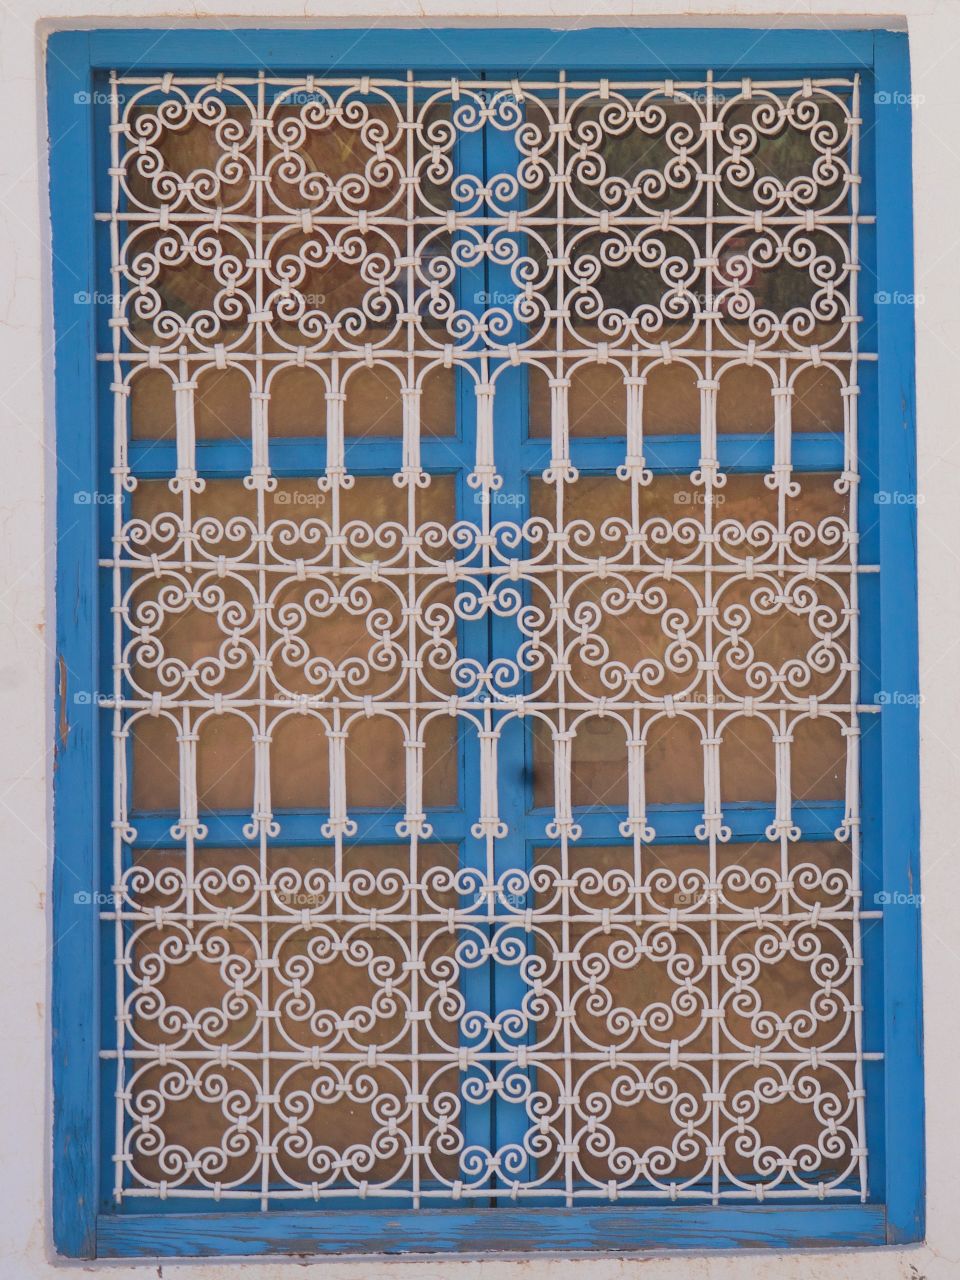 A colorful designed Moroccan window grating